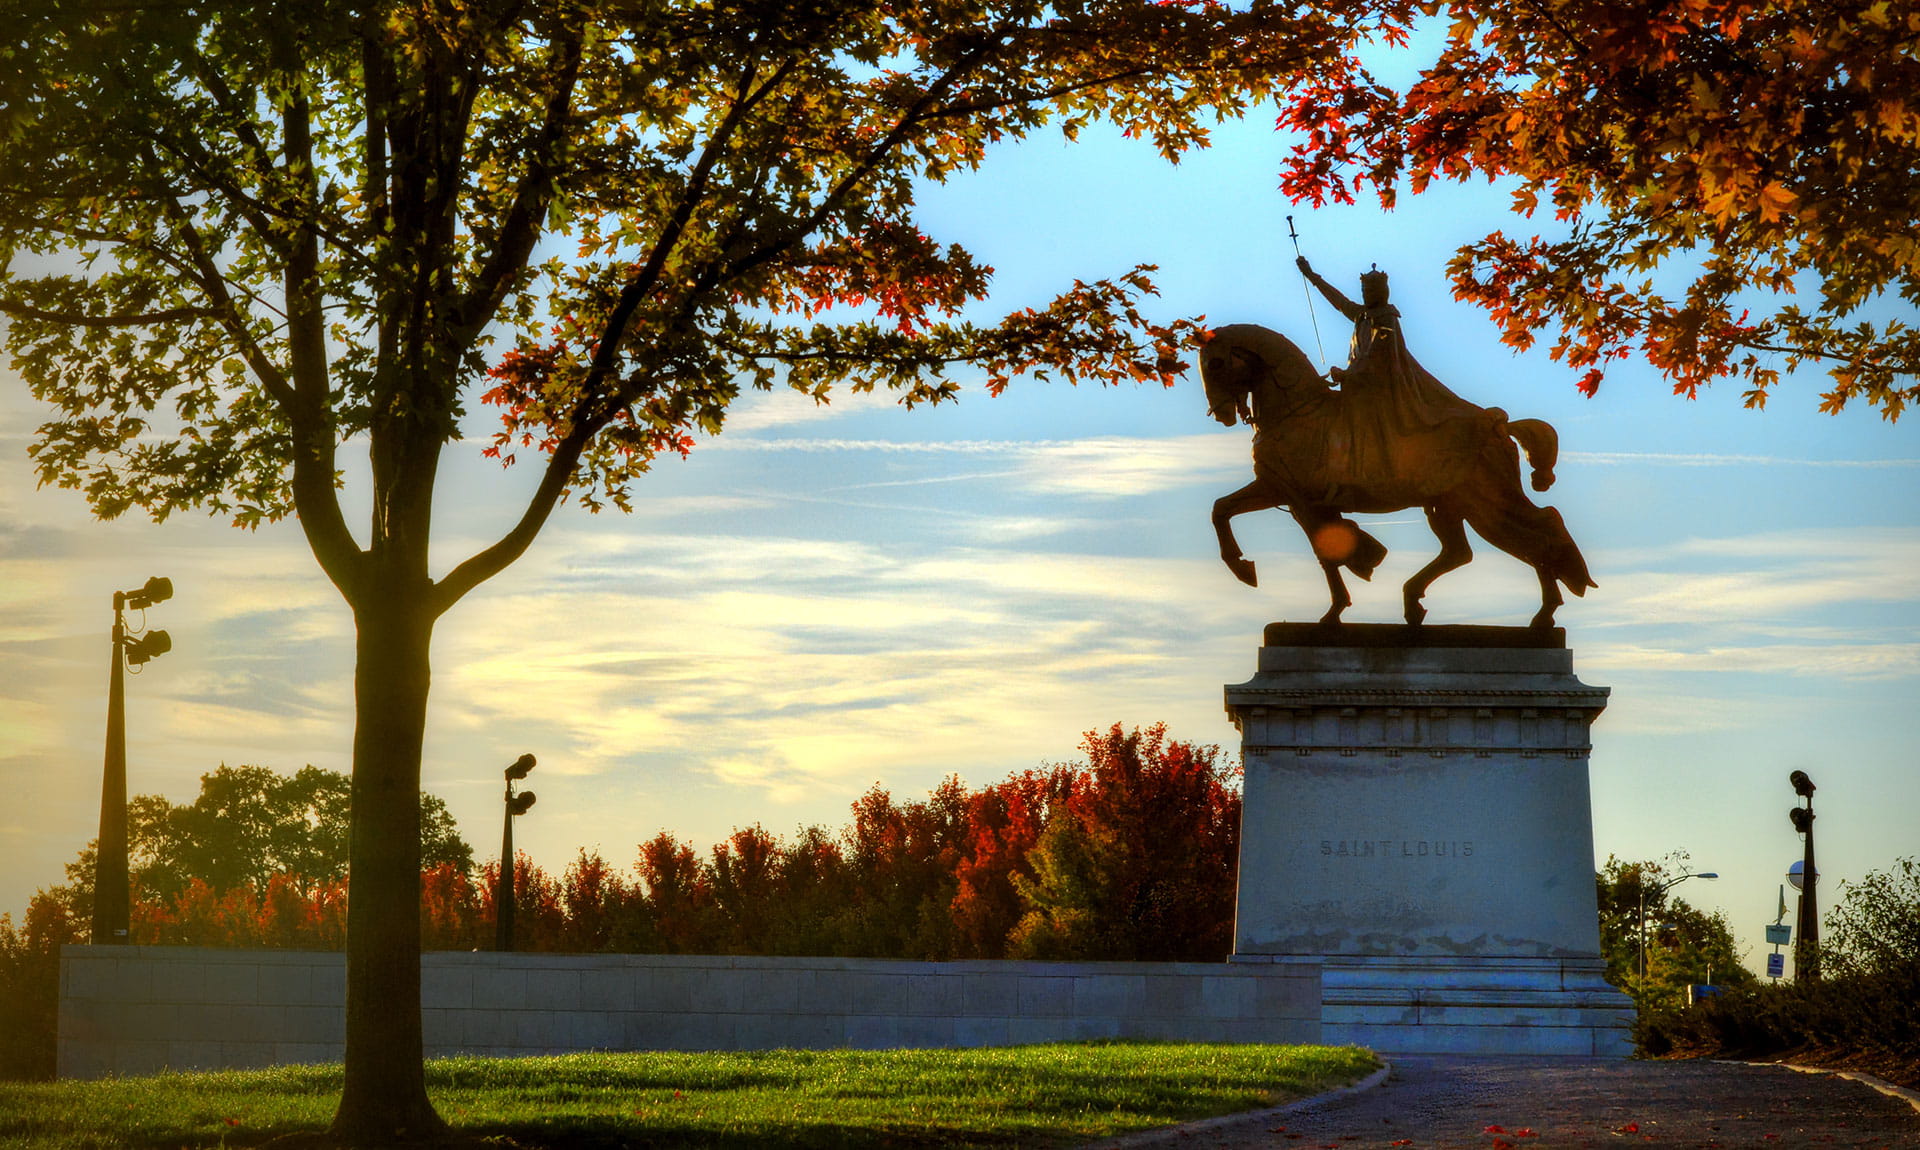 King Louis IX of France statue in Forest Park, St. Louis